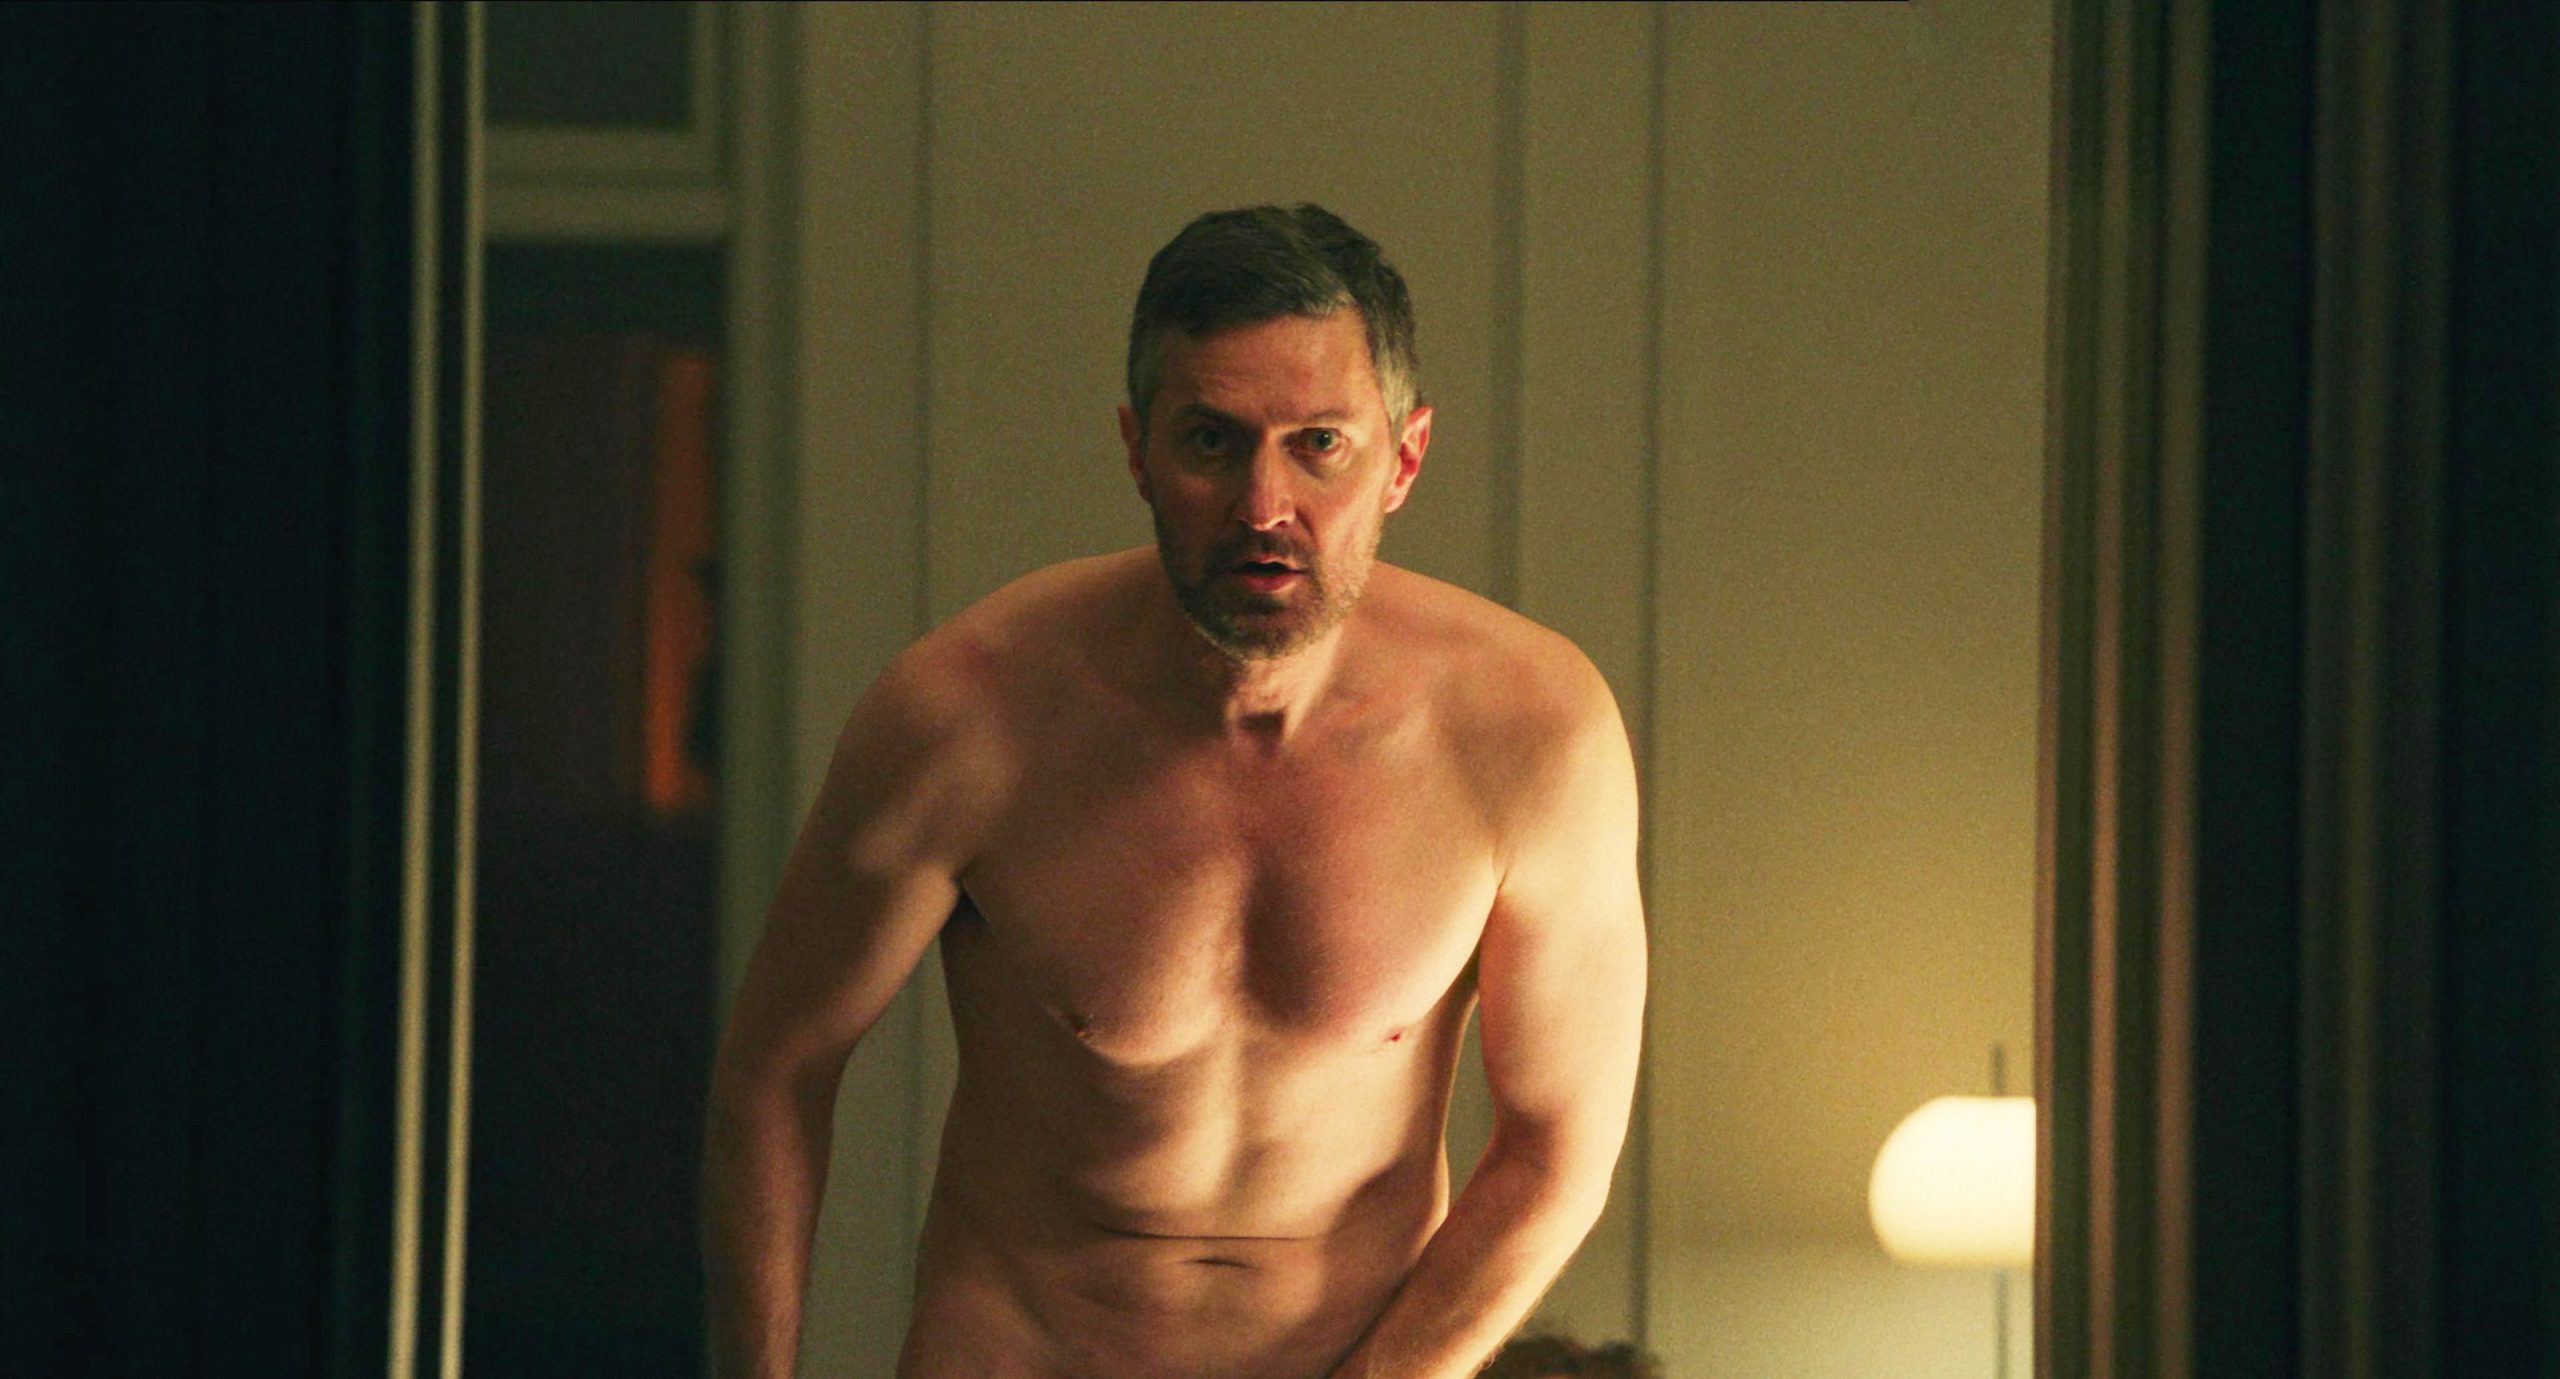 Richard Armitage speaks candidly about the frontal nude scene in Obsession